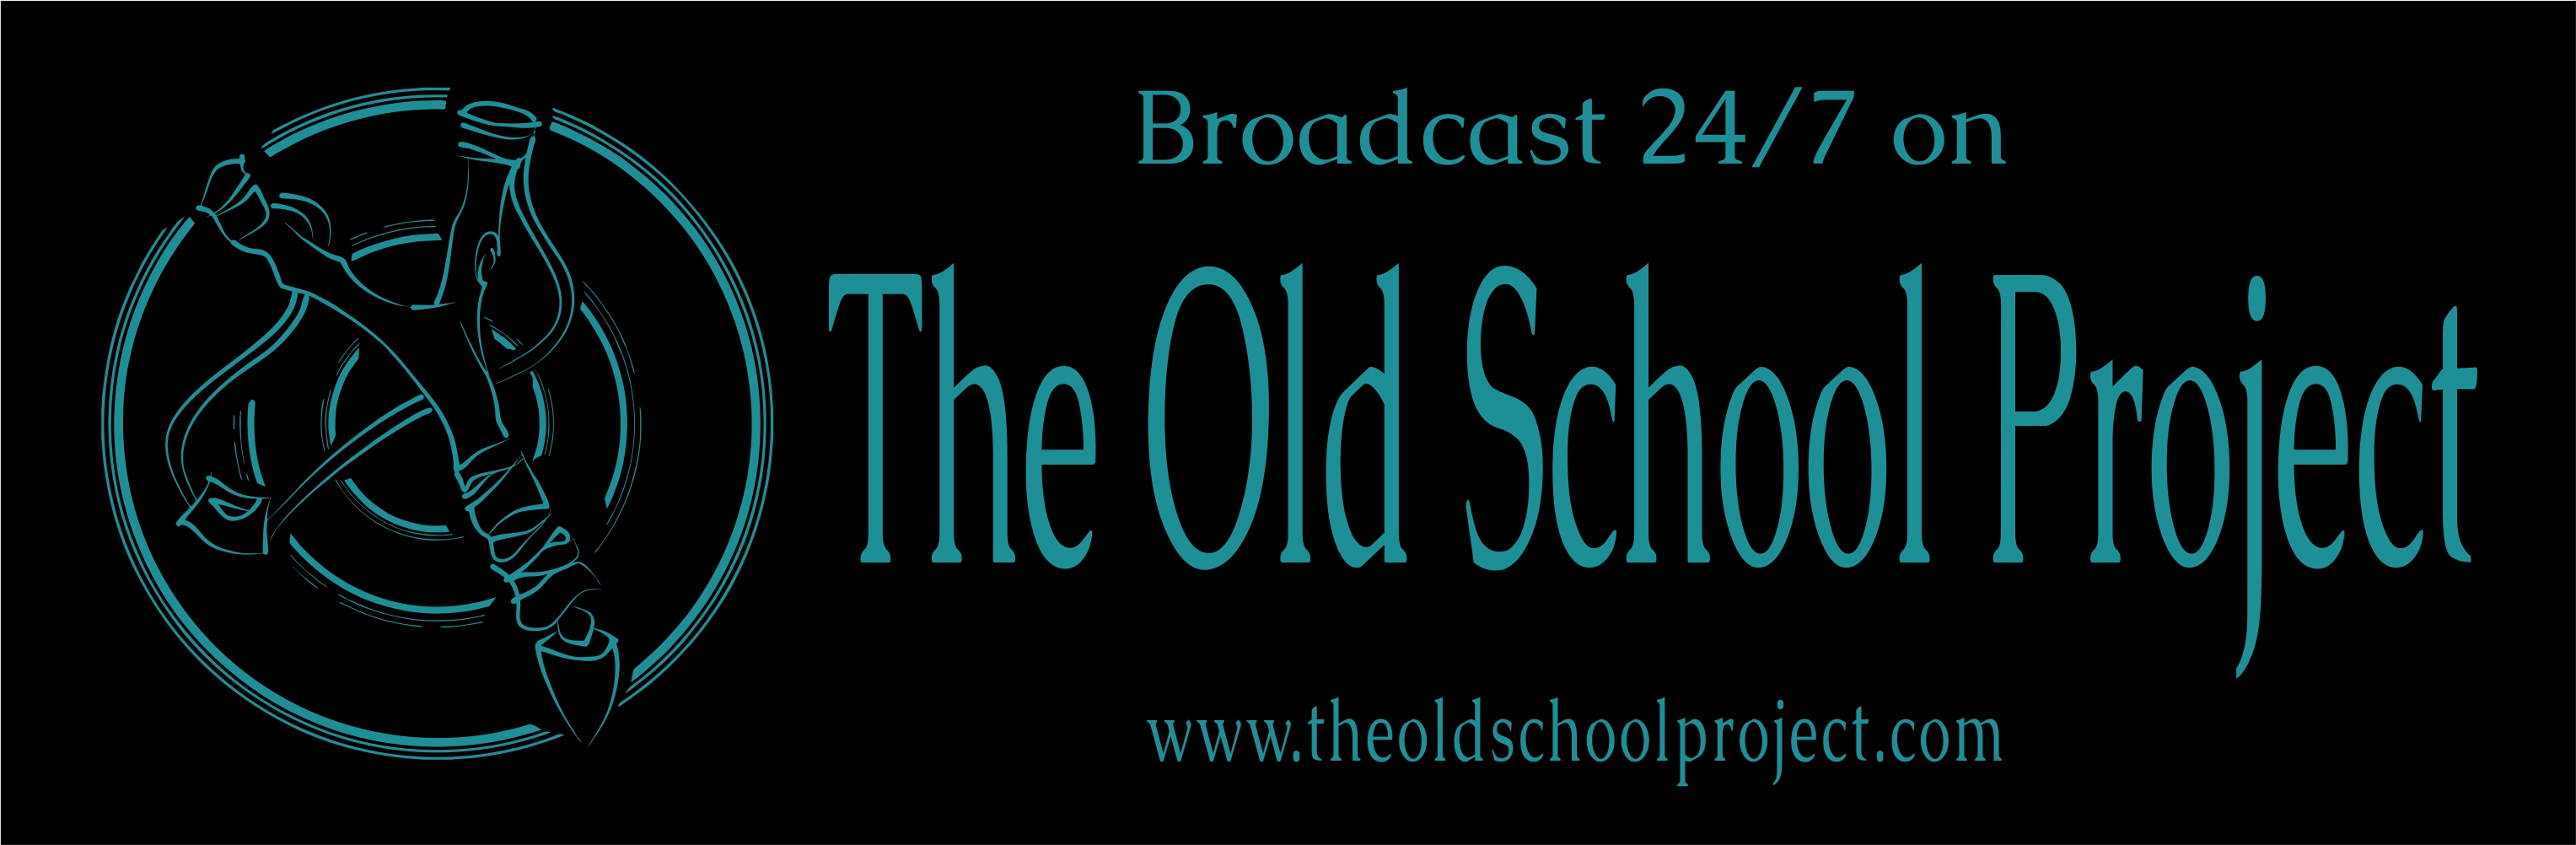 The Old School Project Logo